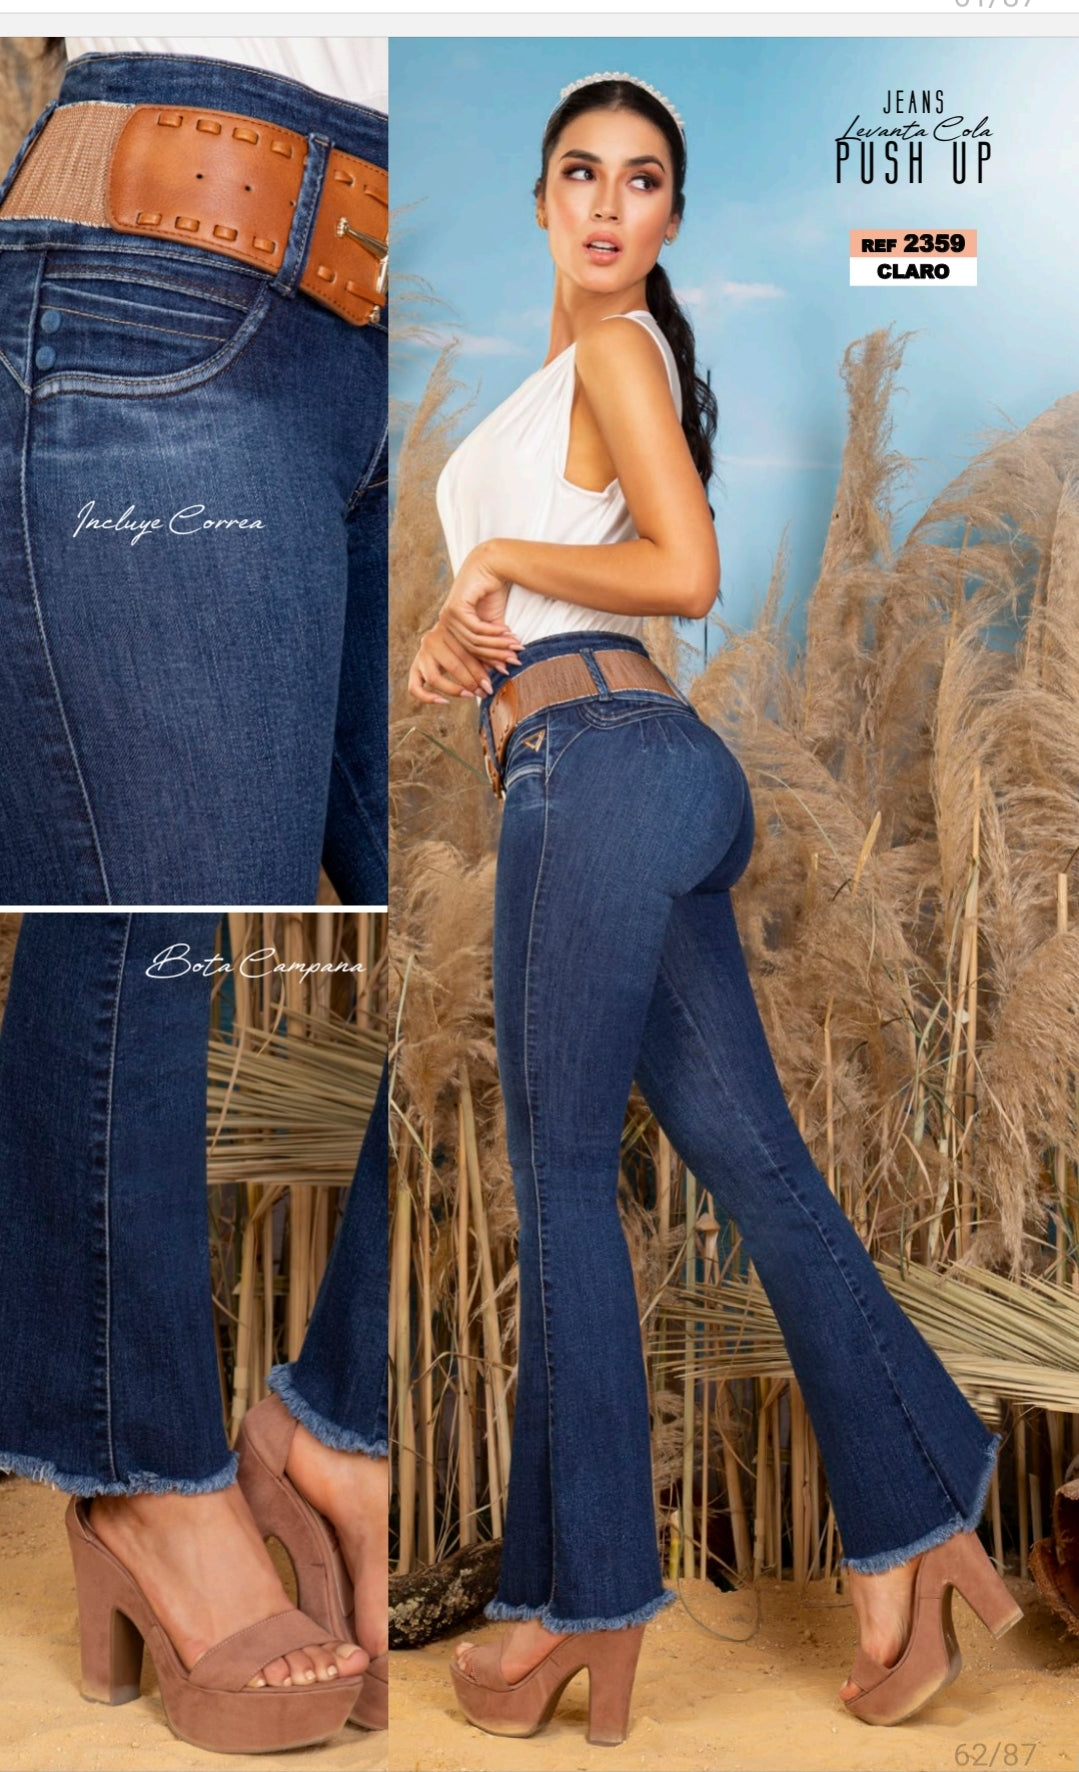 DIVINA COLLECTION PUSH UP JEANS – Tammy's High Fashion